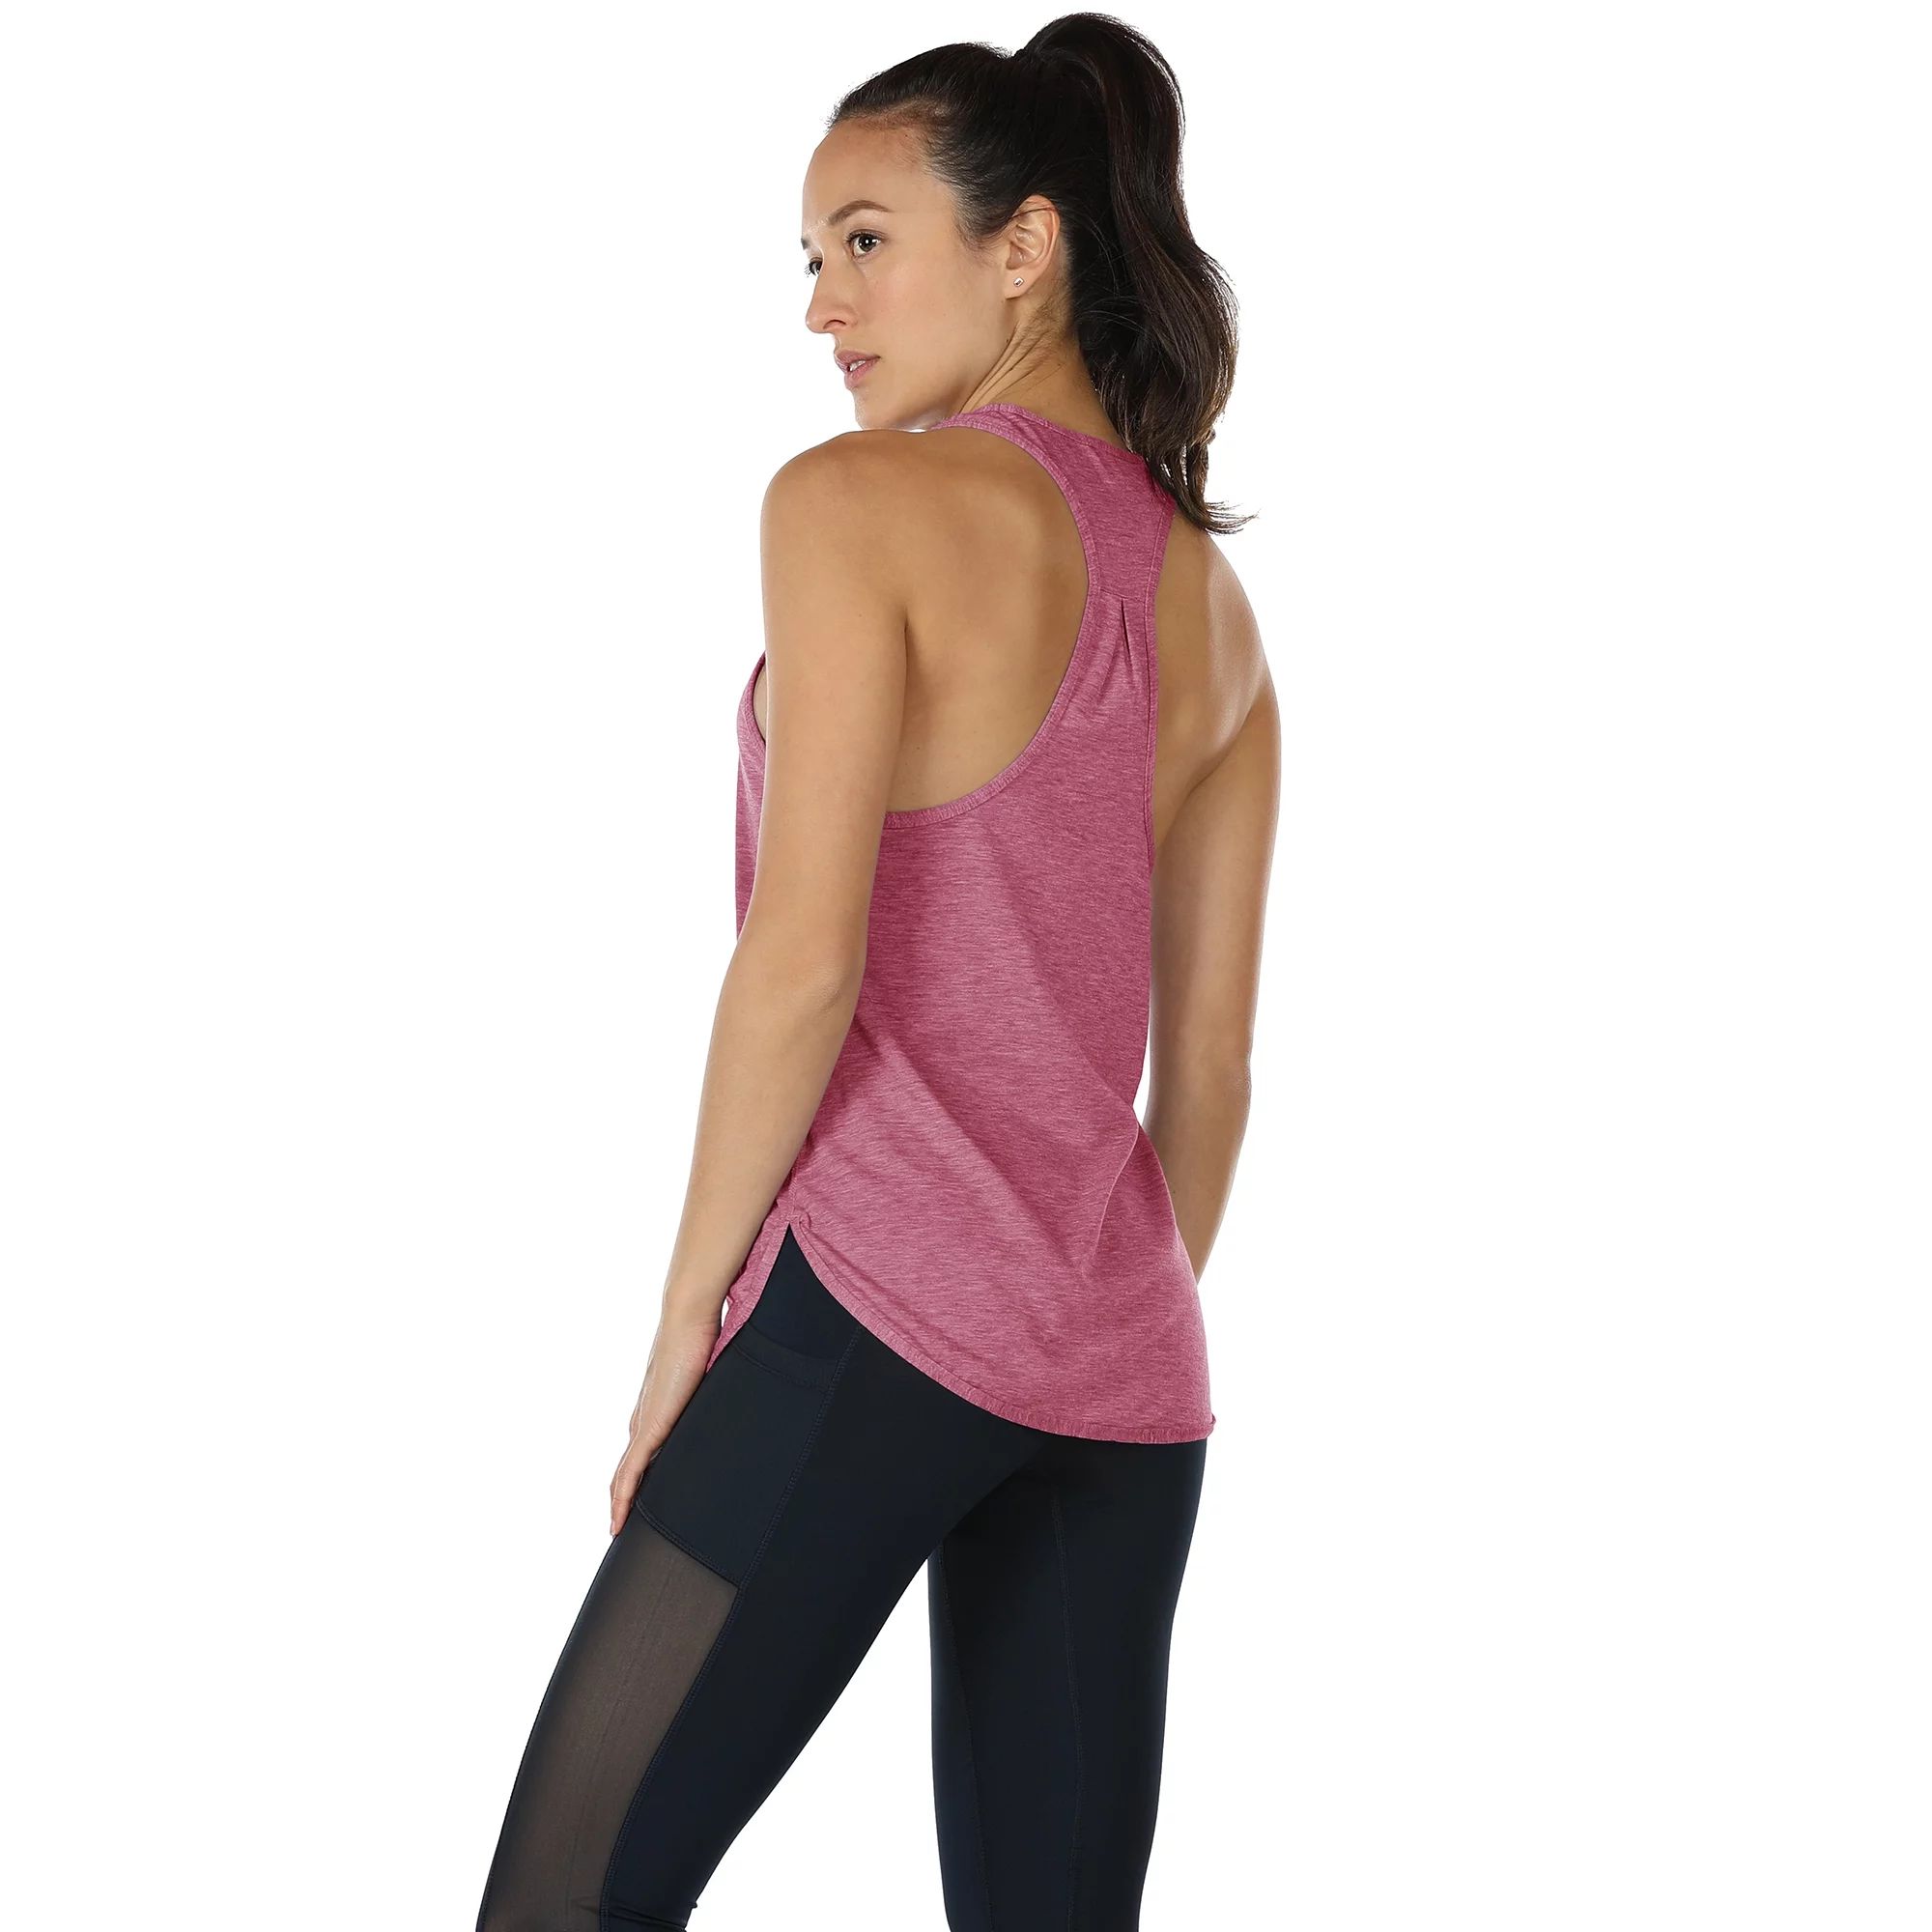 icyzone Racerback Workout Tank Tops for Women - Athletic Running Yoga Tops | Walmart (US)